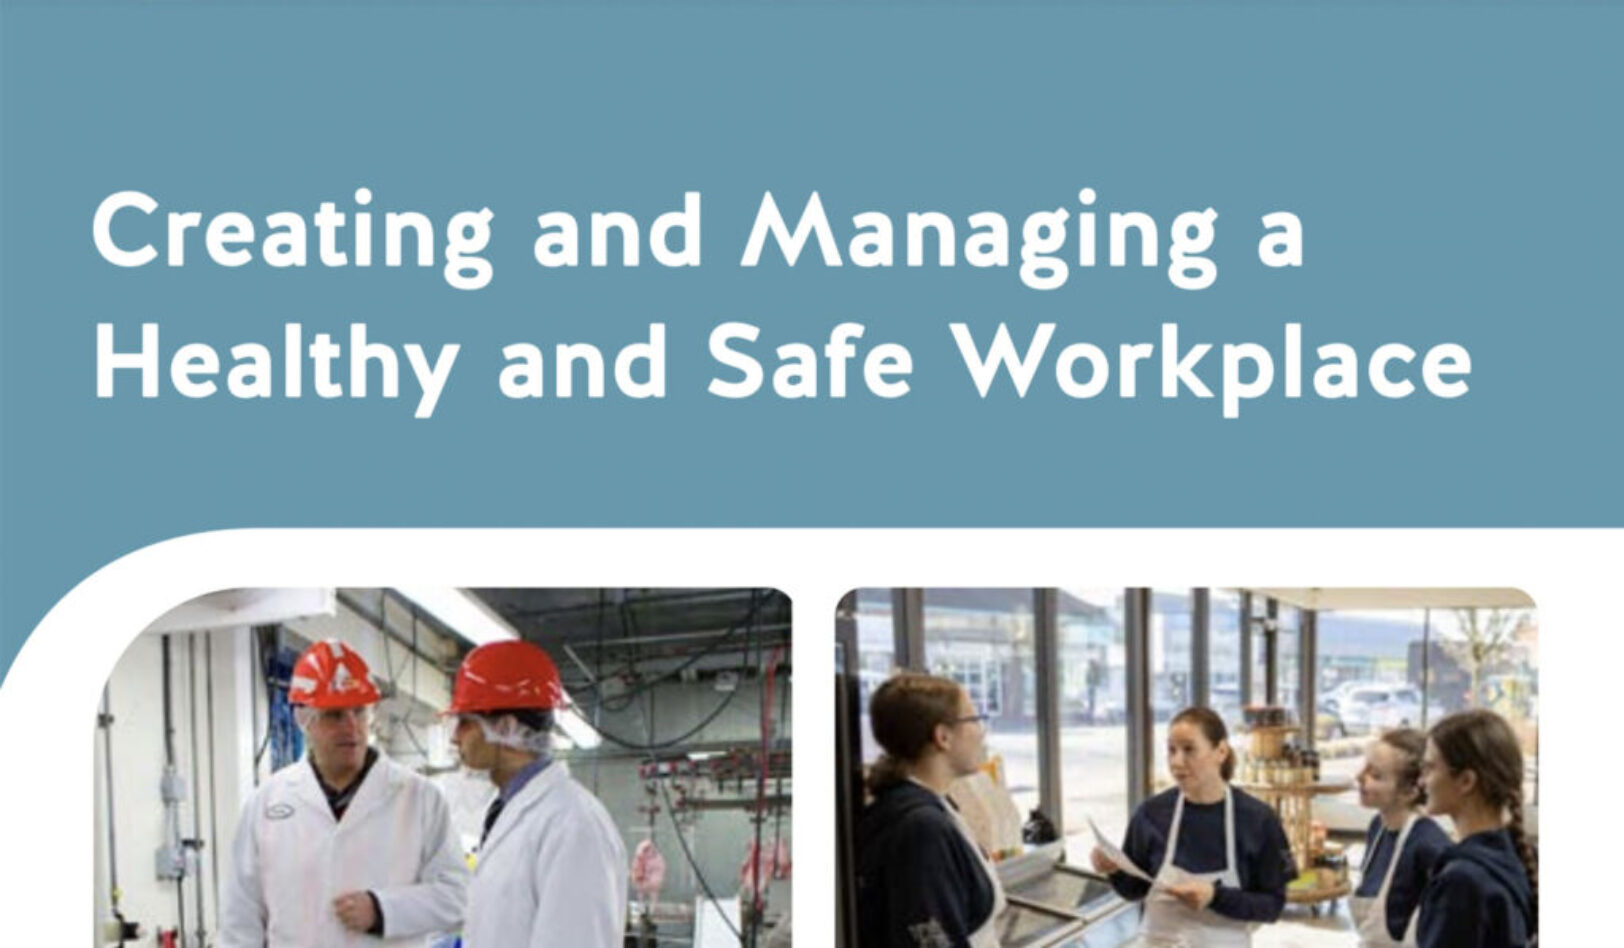 How to Implement a Formal Occupational Health and Safety (OHS) Program